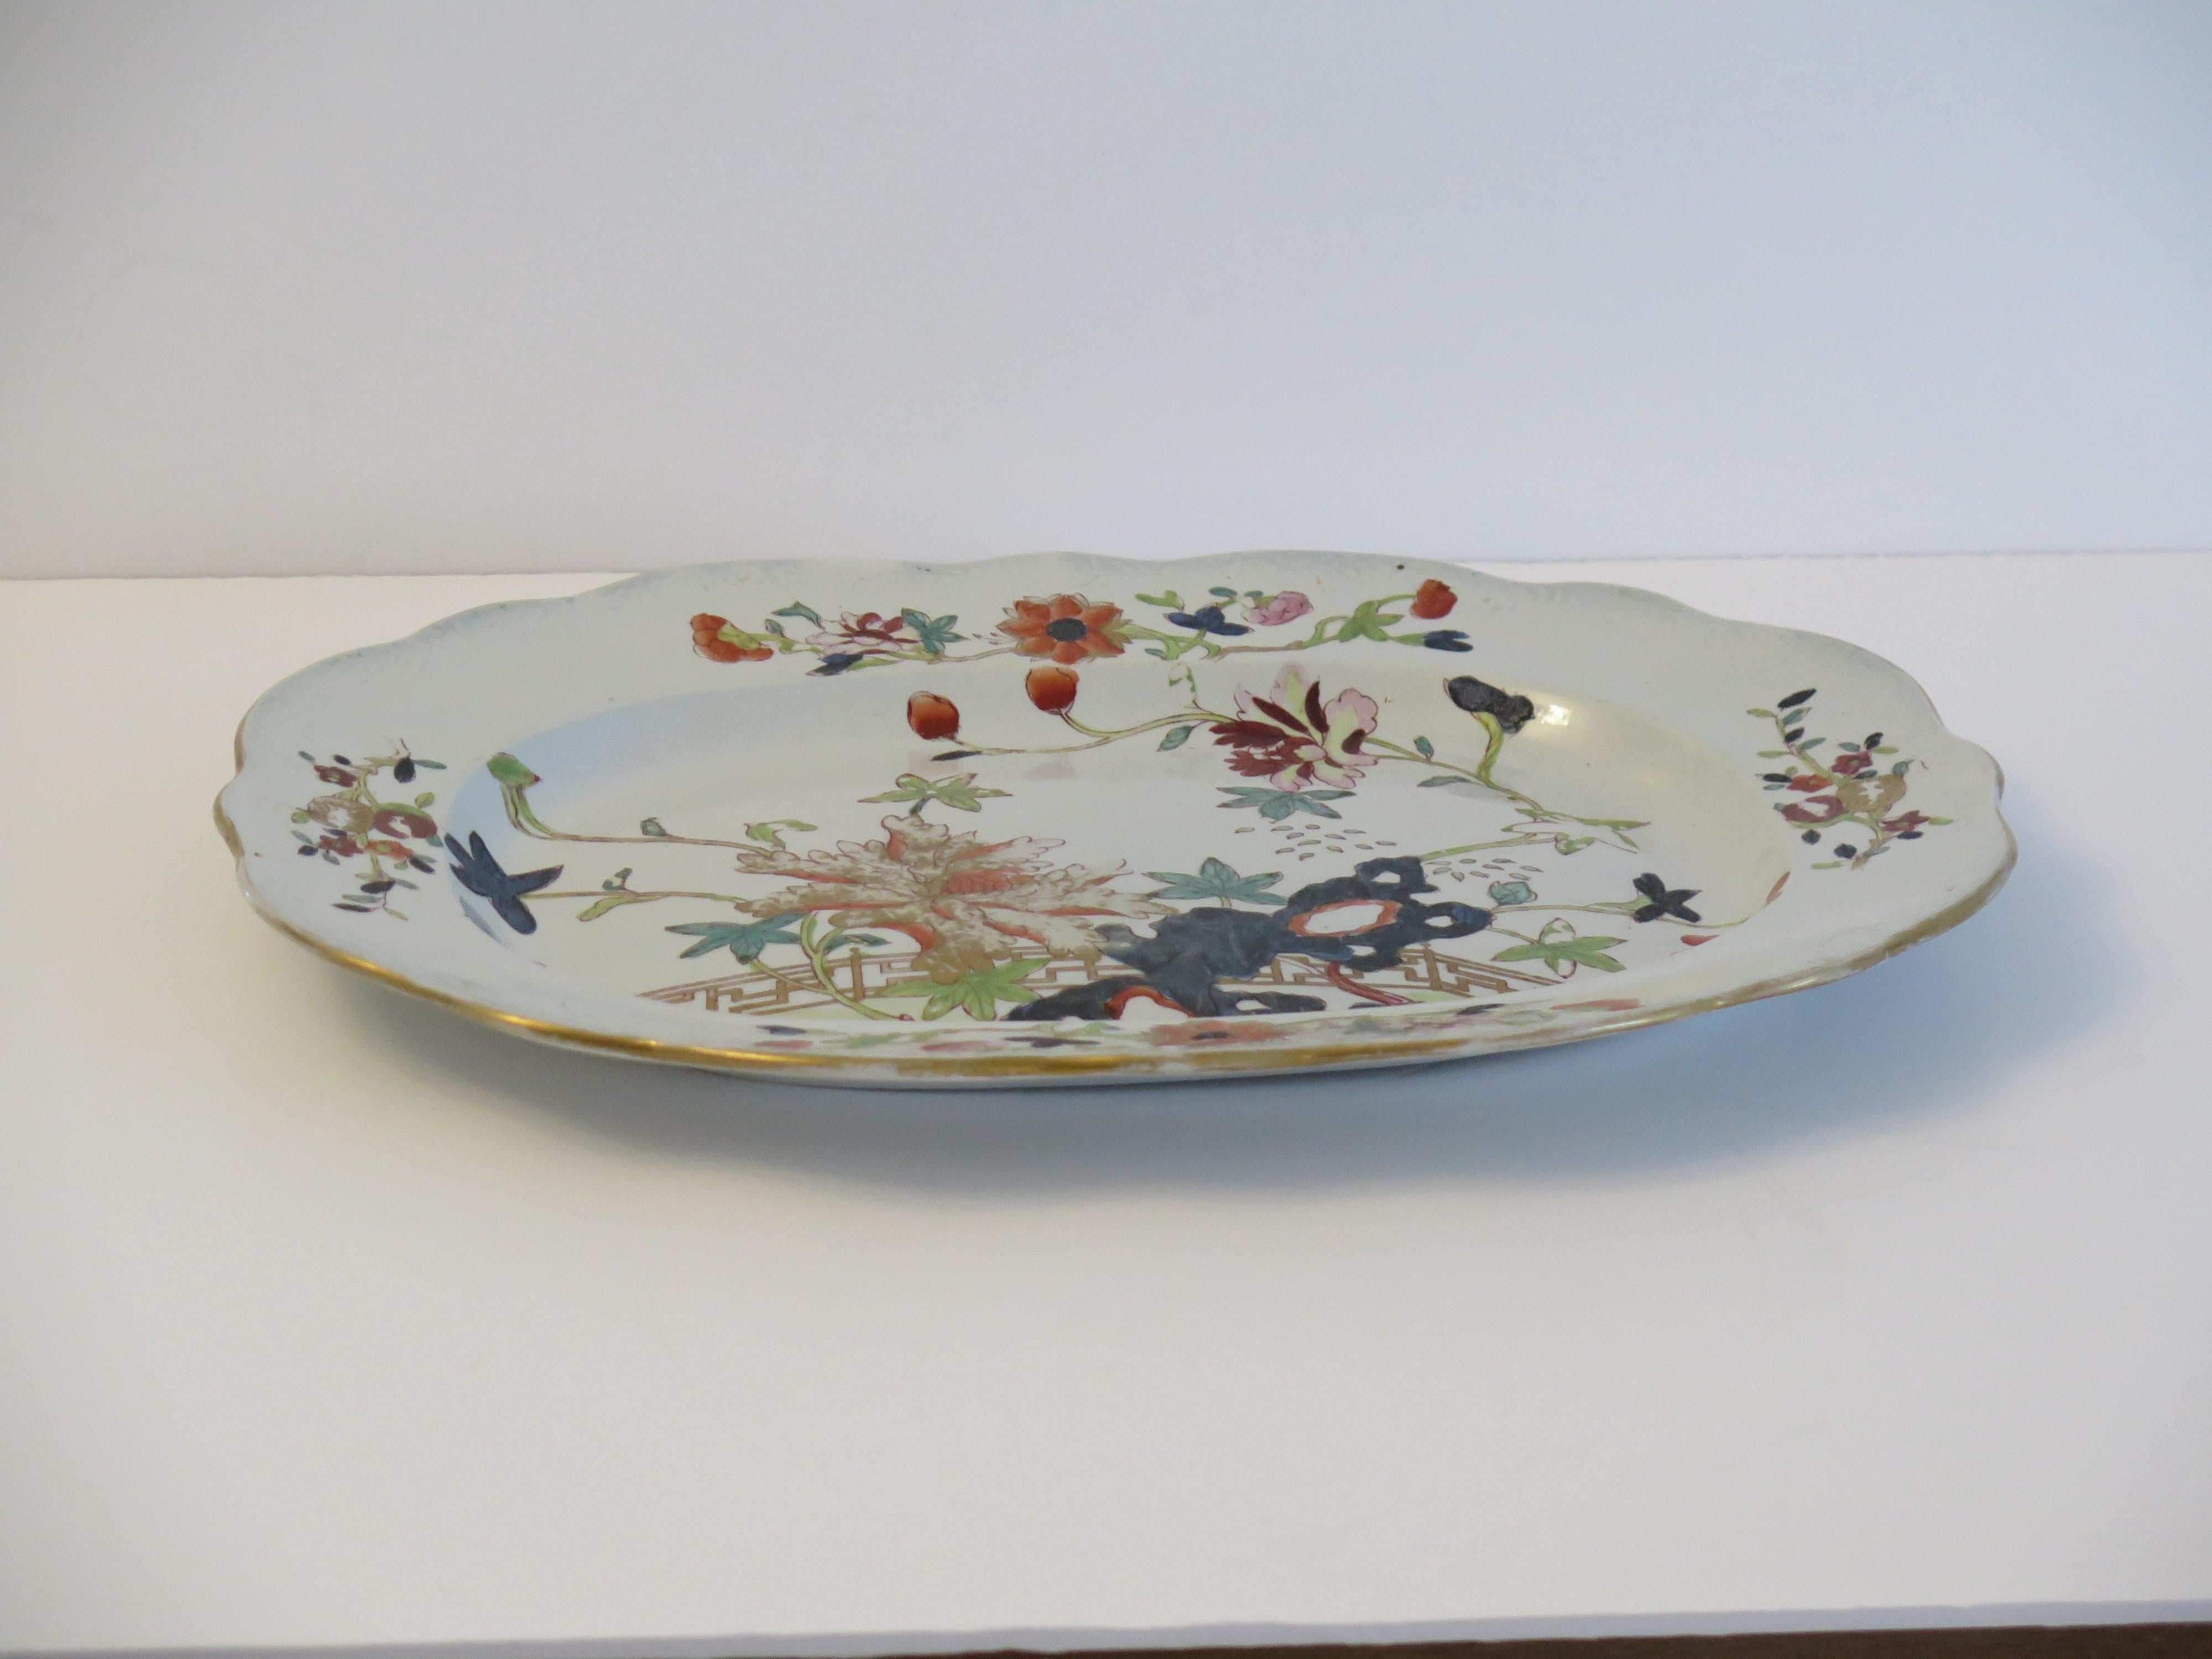 This is a very good hand painted Mason's ironstone large Platter or Meat Plate, in the Fence, Rock and Tree gilded pattern, from their earliest George IIIrd period, circa 1818.

The piece is well potted with an oval shape having a wavy edge with no